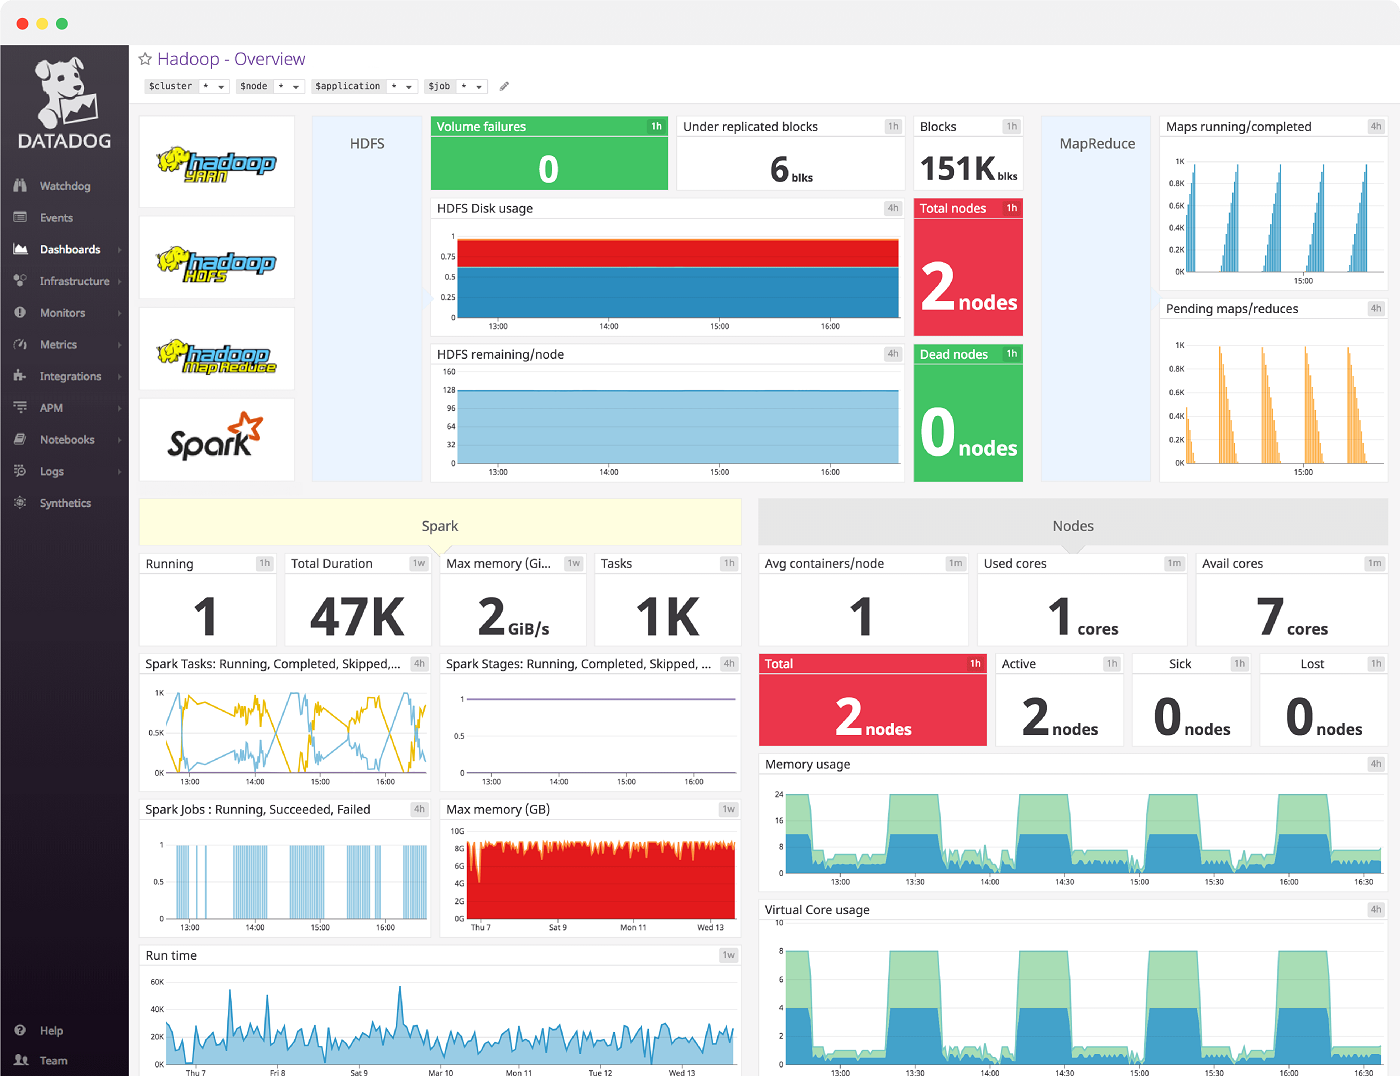 Screenshot of Hadoop data visualization created with Datadog’s out-of-the-box dashboard.